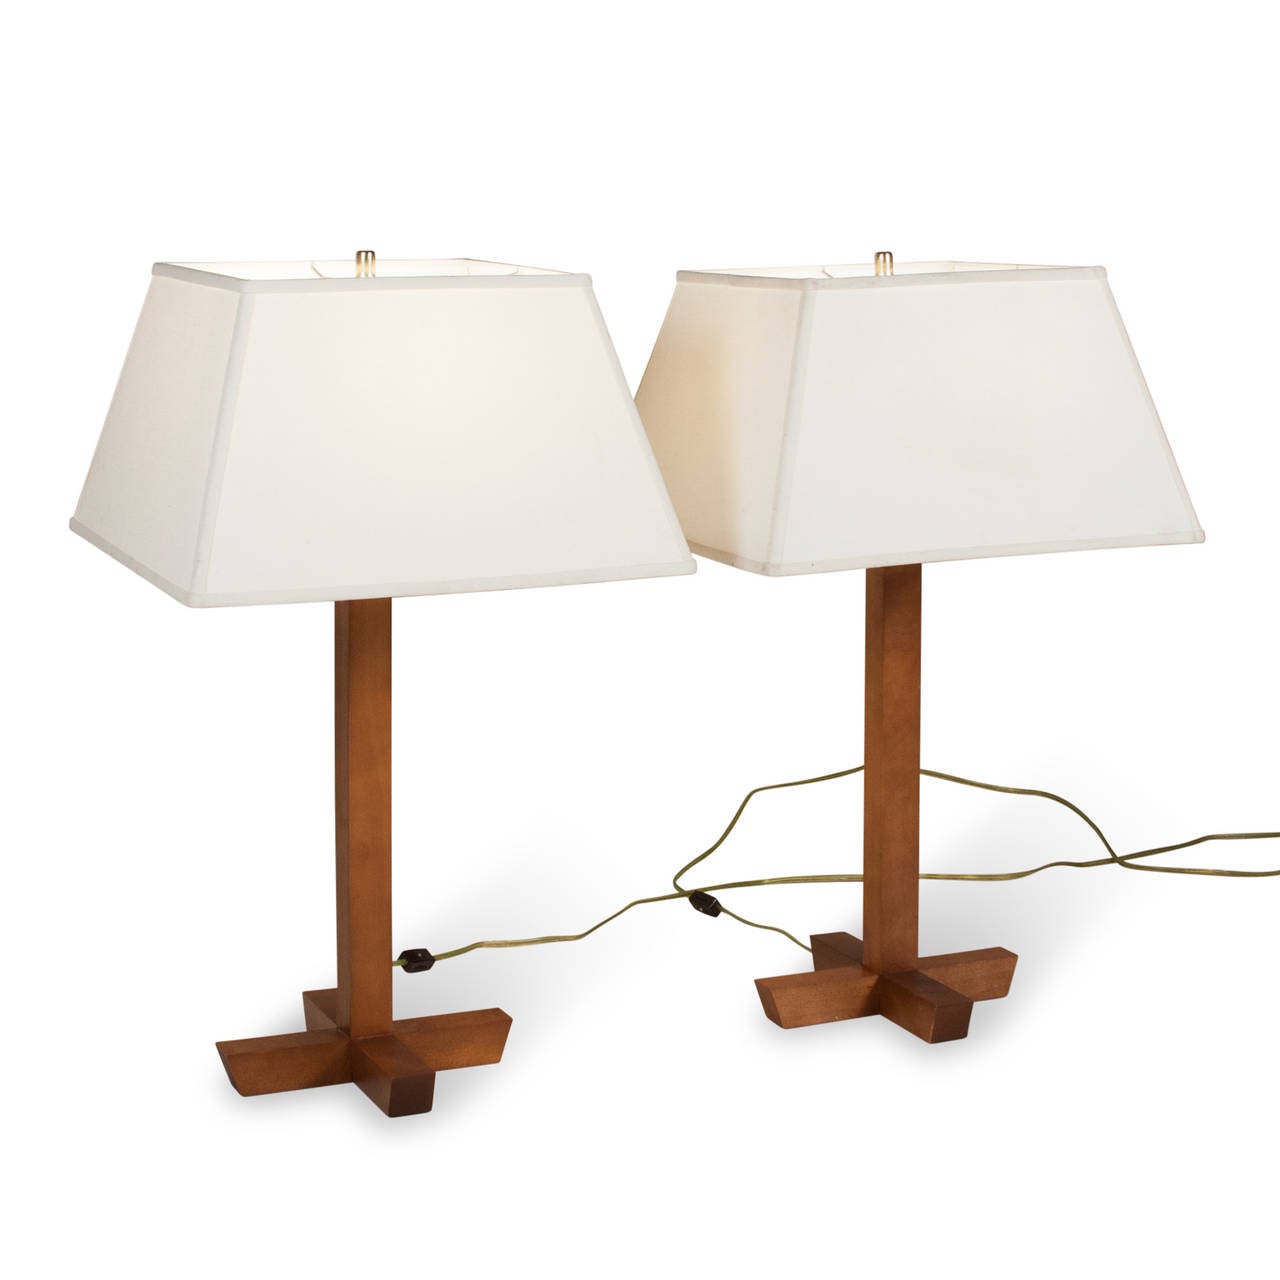 Pair of 1970s Walnut Table Lamps In Good Condition For Sale In Brooklyn, NY